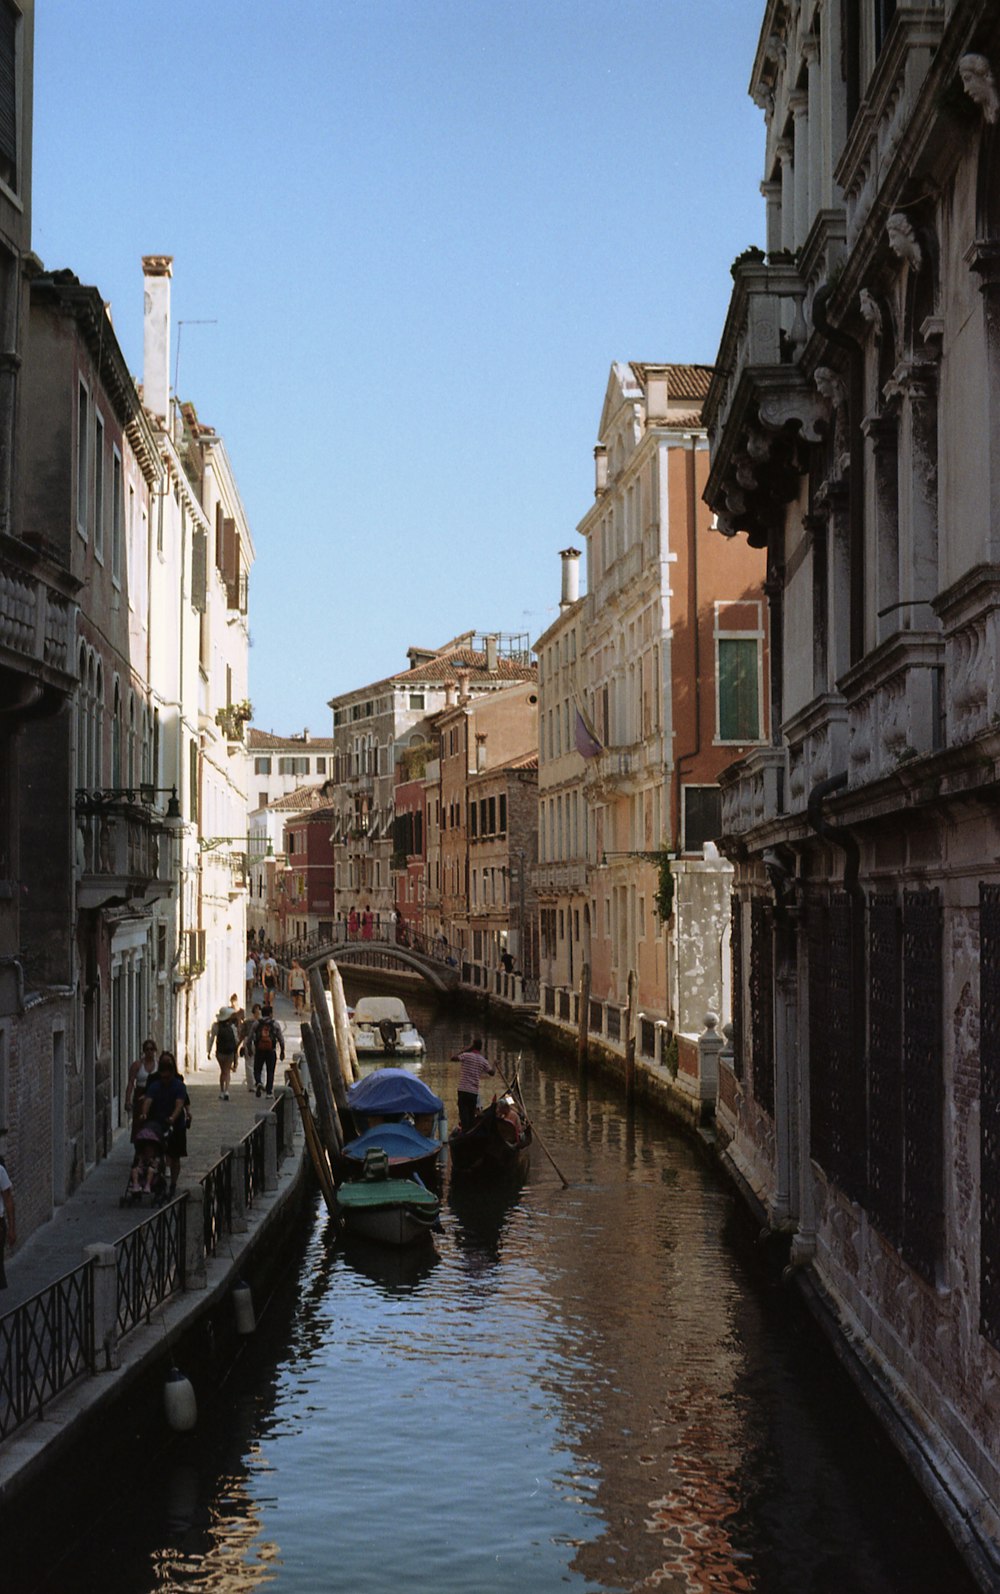 a narrow canal with several boats in it